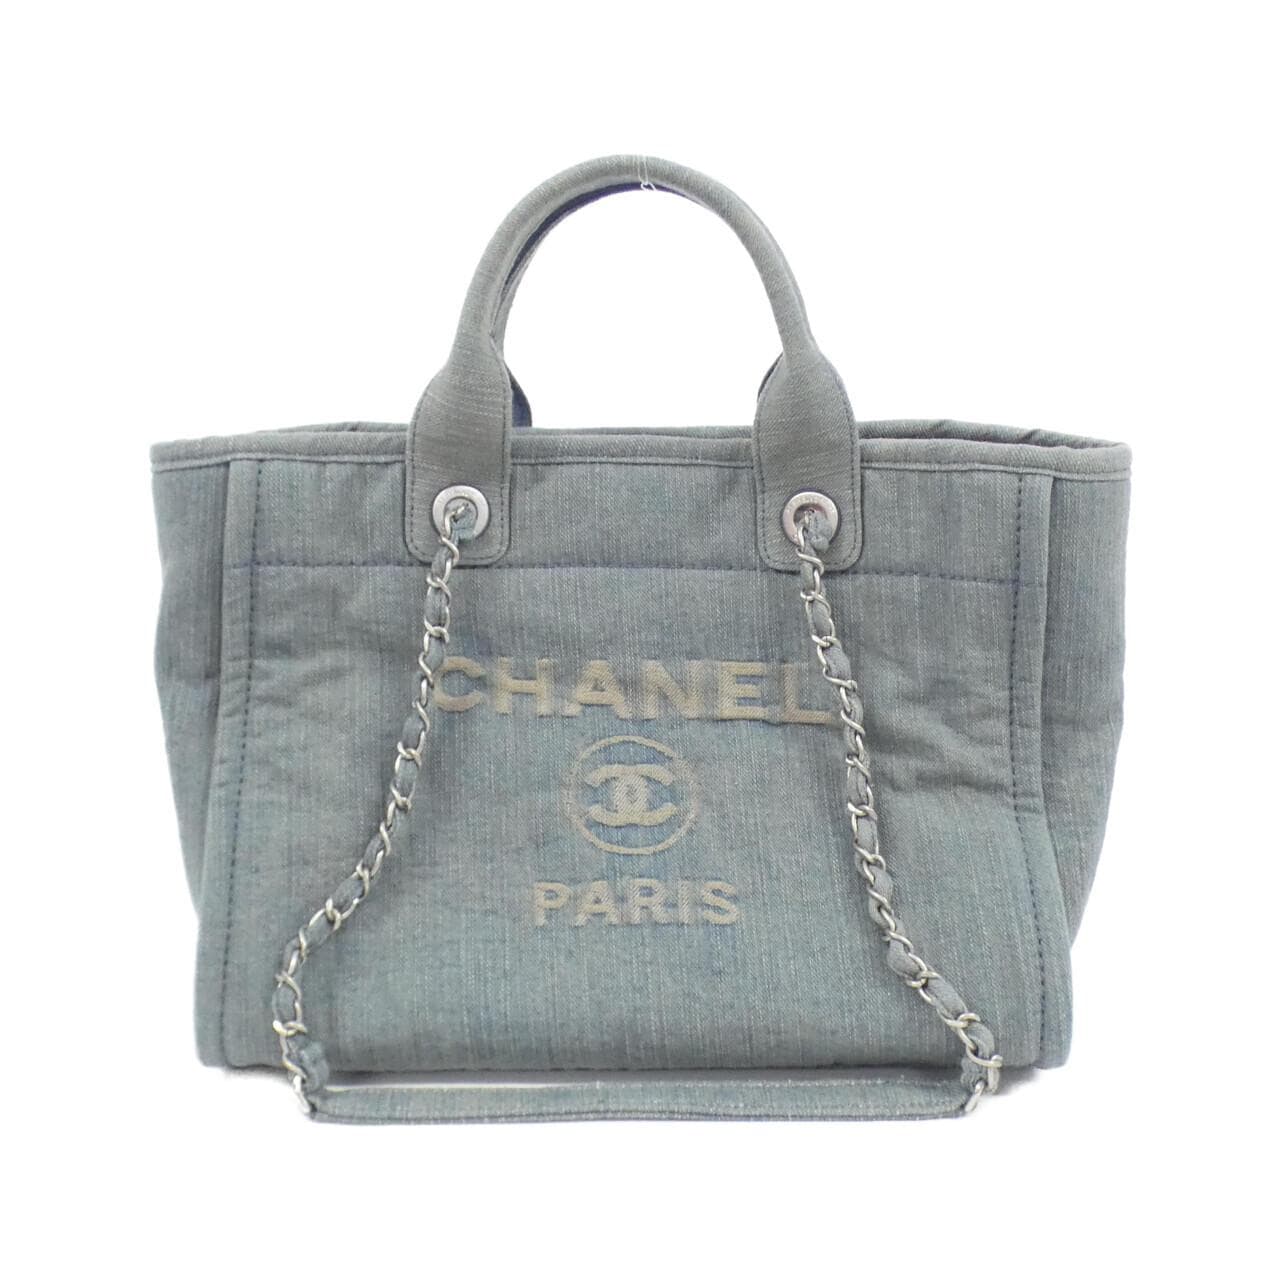 CHANEL Deauville Line AS3257 包